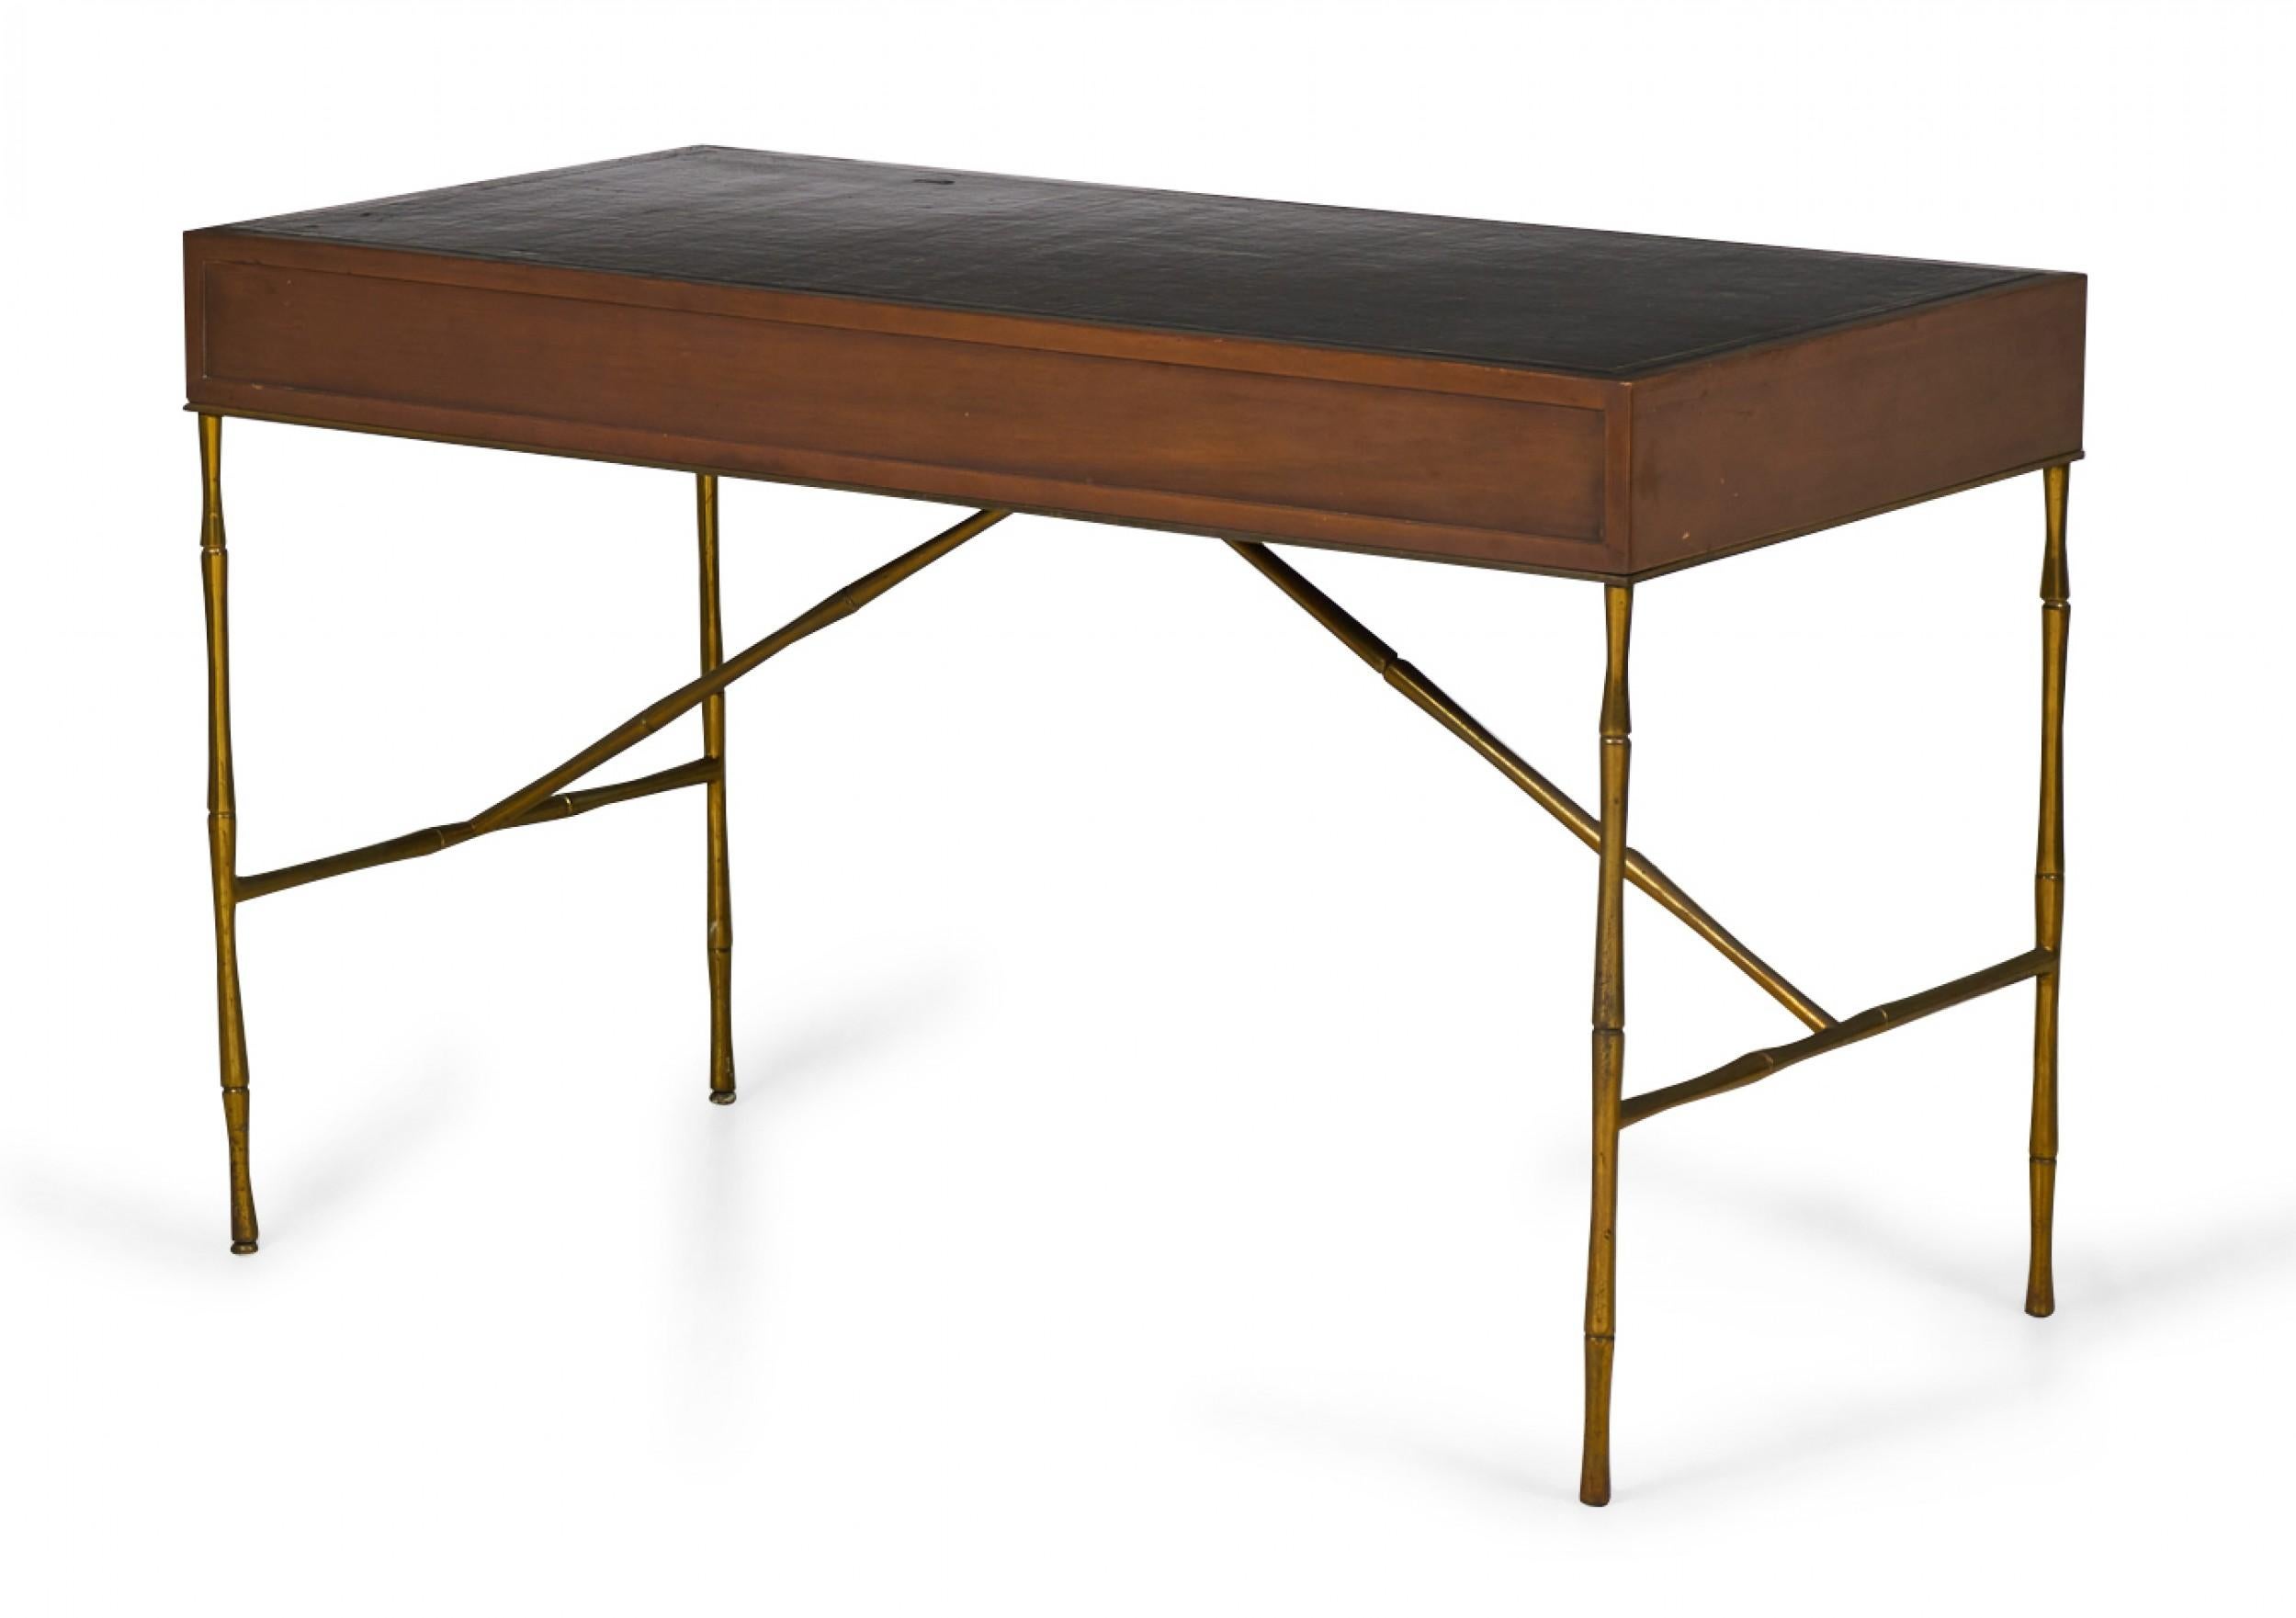 20th Century Baker Furniture American Mid-Century Walnut, Leather, and Brass Faux Bamboo Desk For Sale